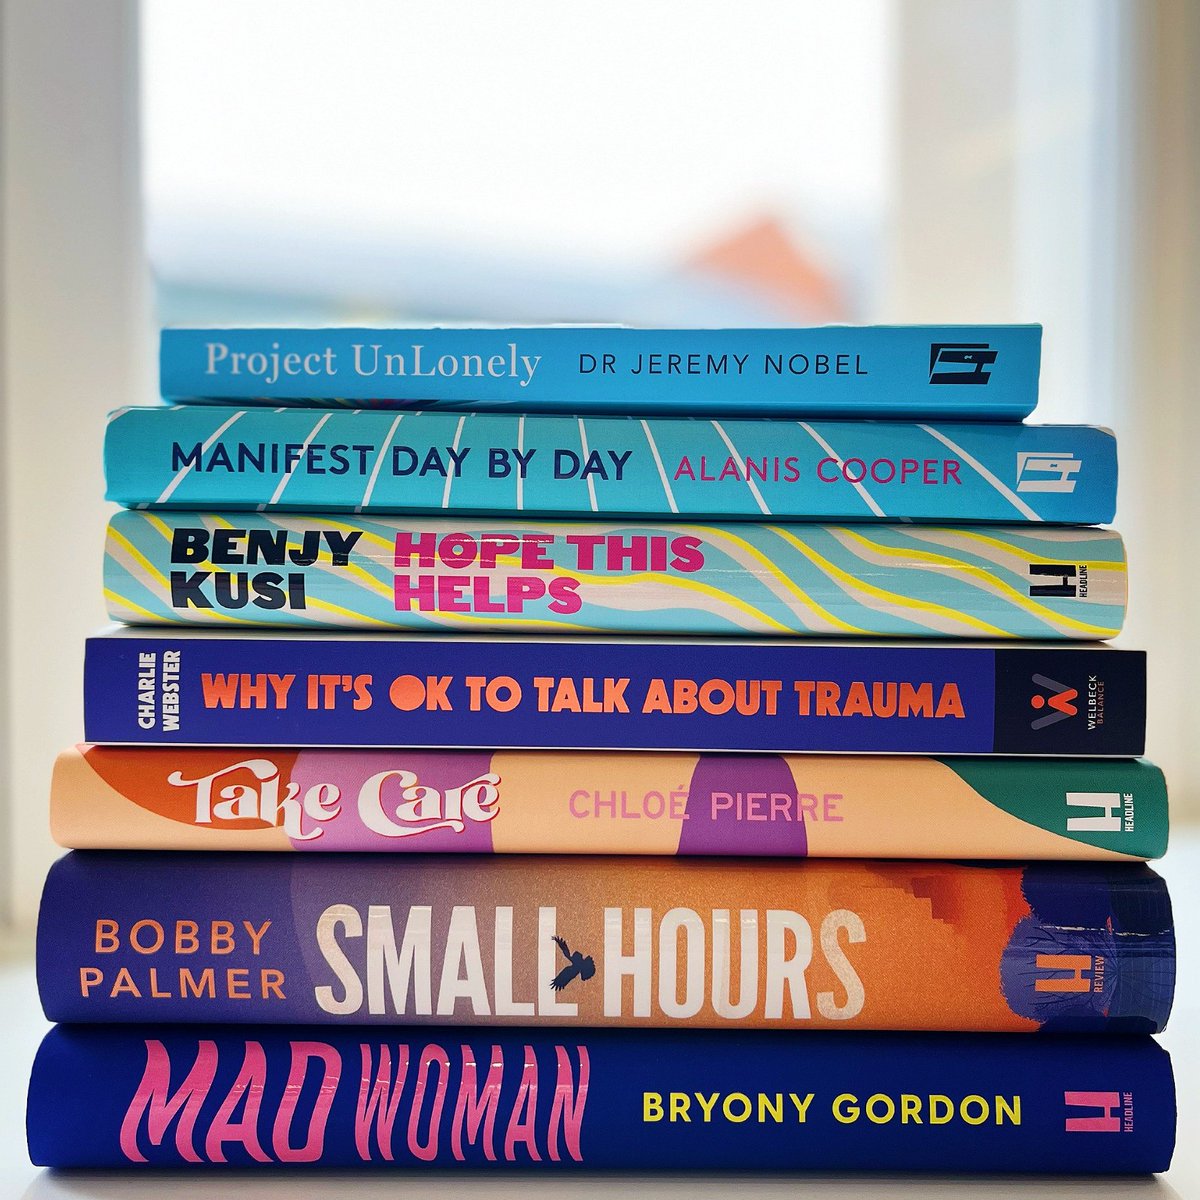 This week marks #MentalHealthAwarenessWeek and this stack of incredible books, both fiction & non-fiction, powerfully explore the difficulties that can come with poor mental health and offer tools, guidance and companionship to help us all in the difficult moment📚❤️